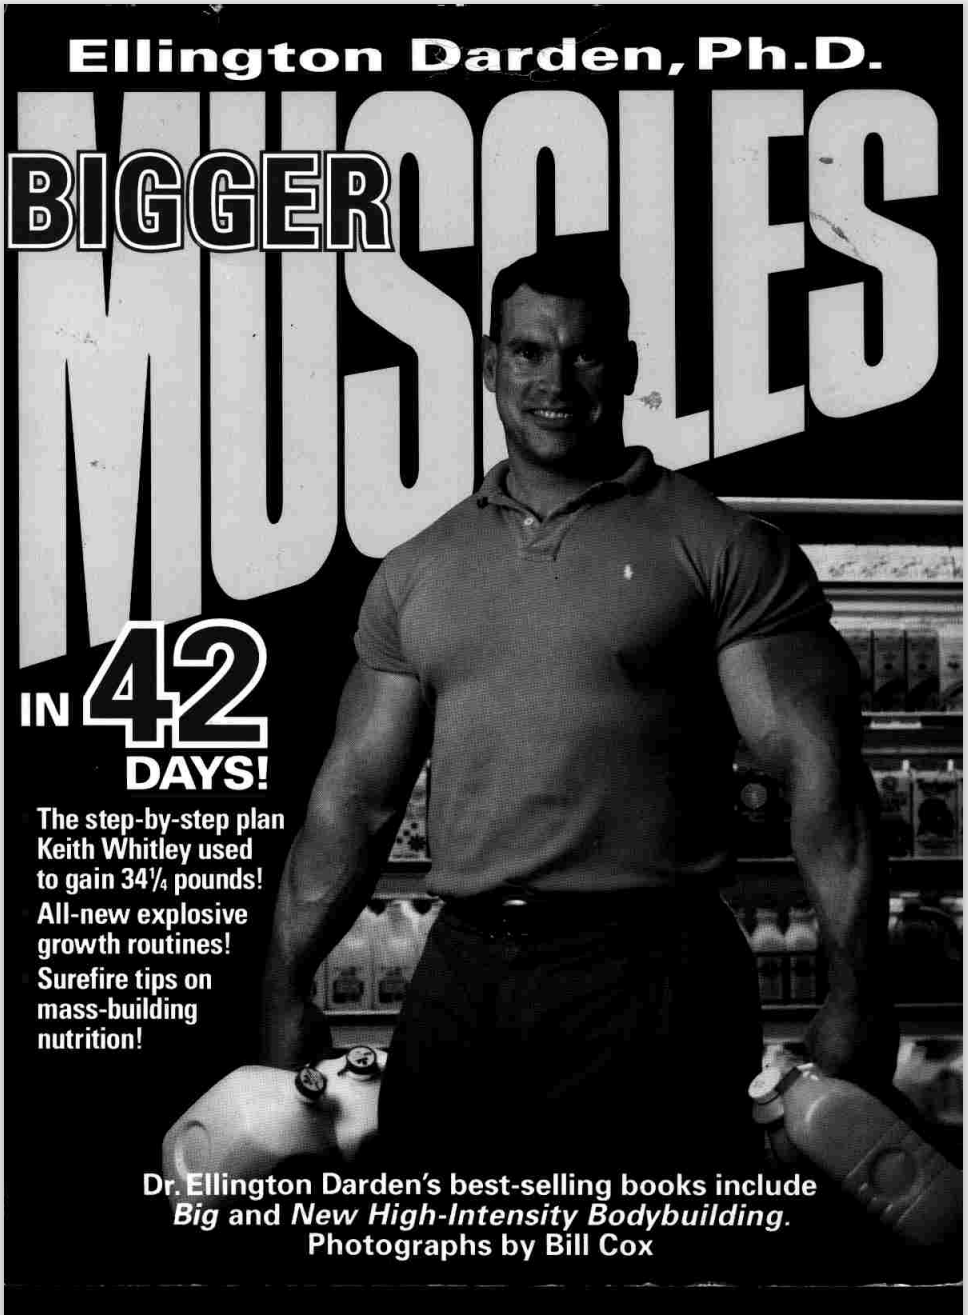 Bigger Muscles in 42 Days